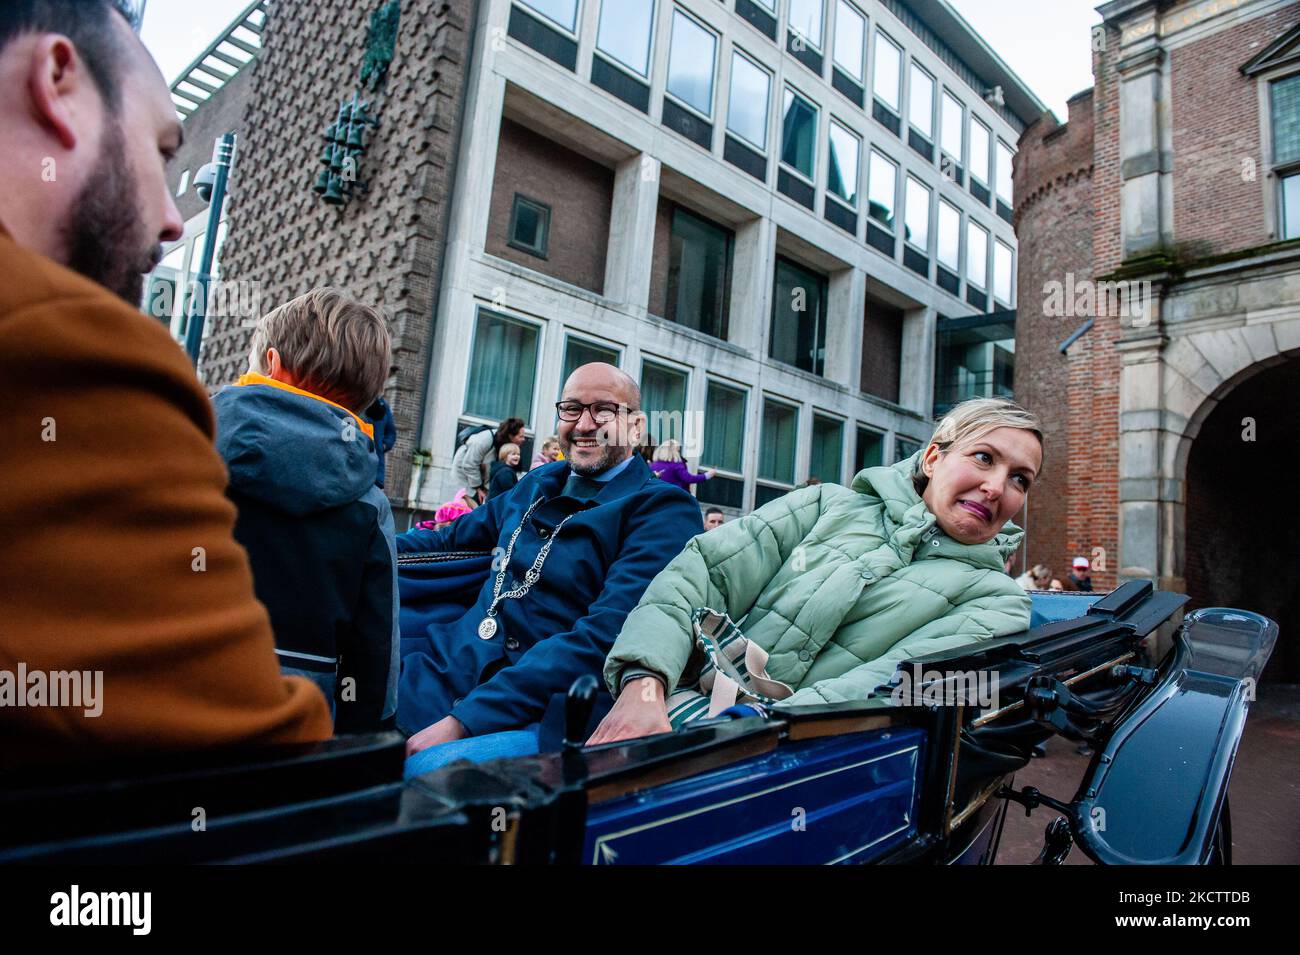 The Mayor of Arnhem, Ahmed Marcouch is arriving in a carriage during the St. Nicholas entrance in Arnhem, on November 13th, 2021. (Photo by Romy Arroyo Fernandez/NurPhoto) Stock Photo